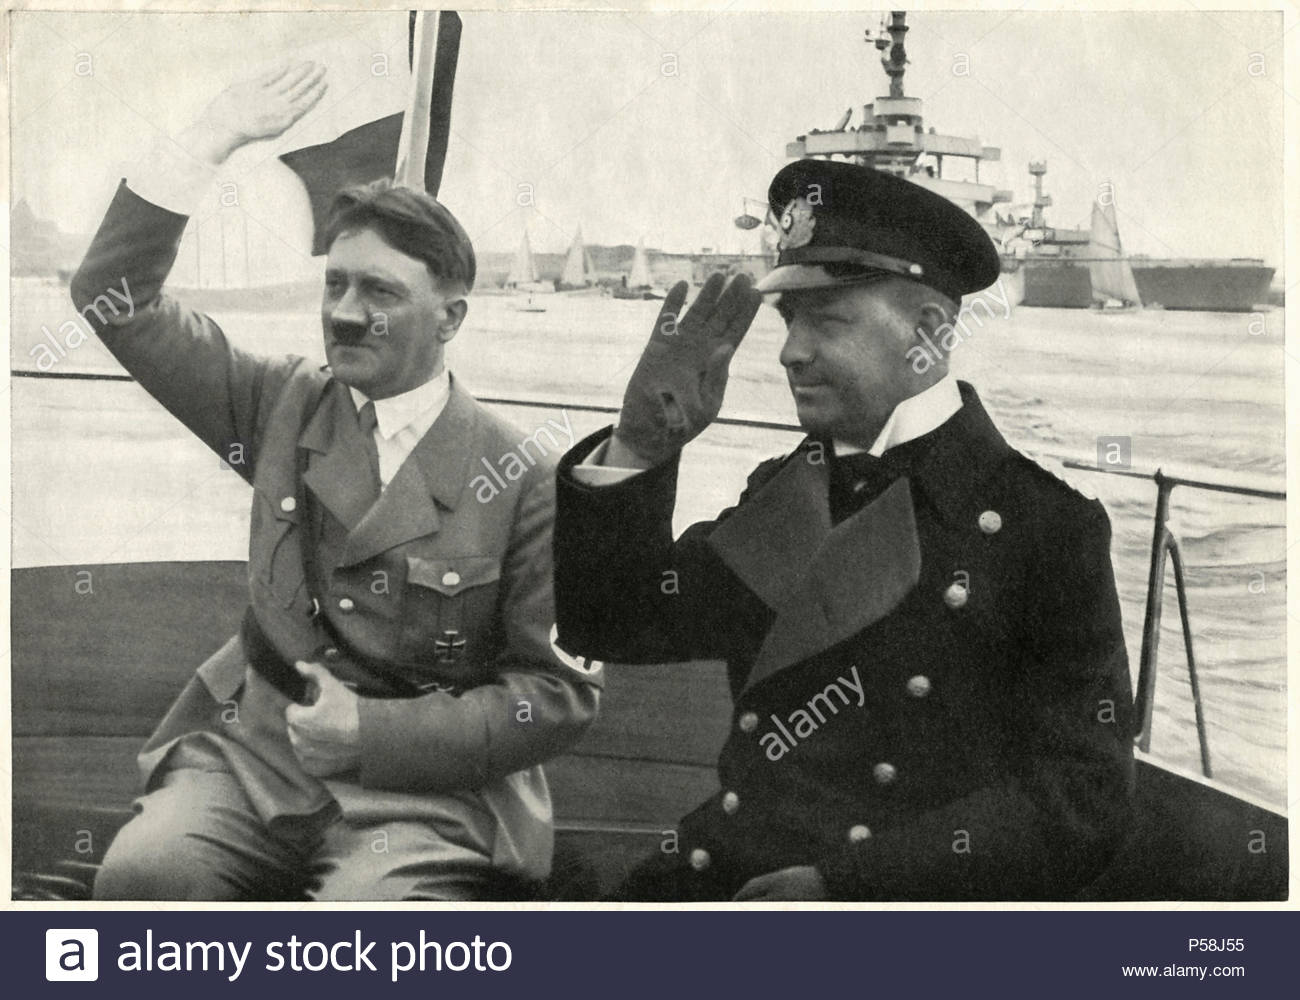 chancellor-adolf-hitler-and-admiral-erich-raeder-reviewing-german-fleet-germany-1930s-P58J55